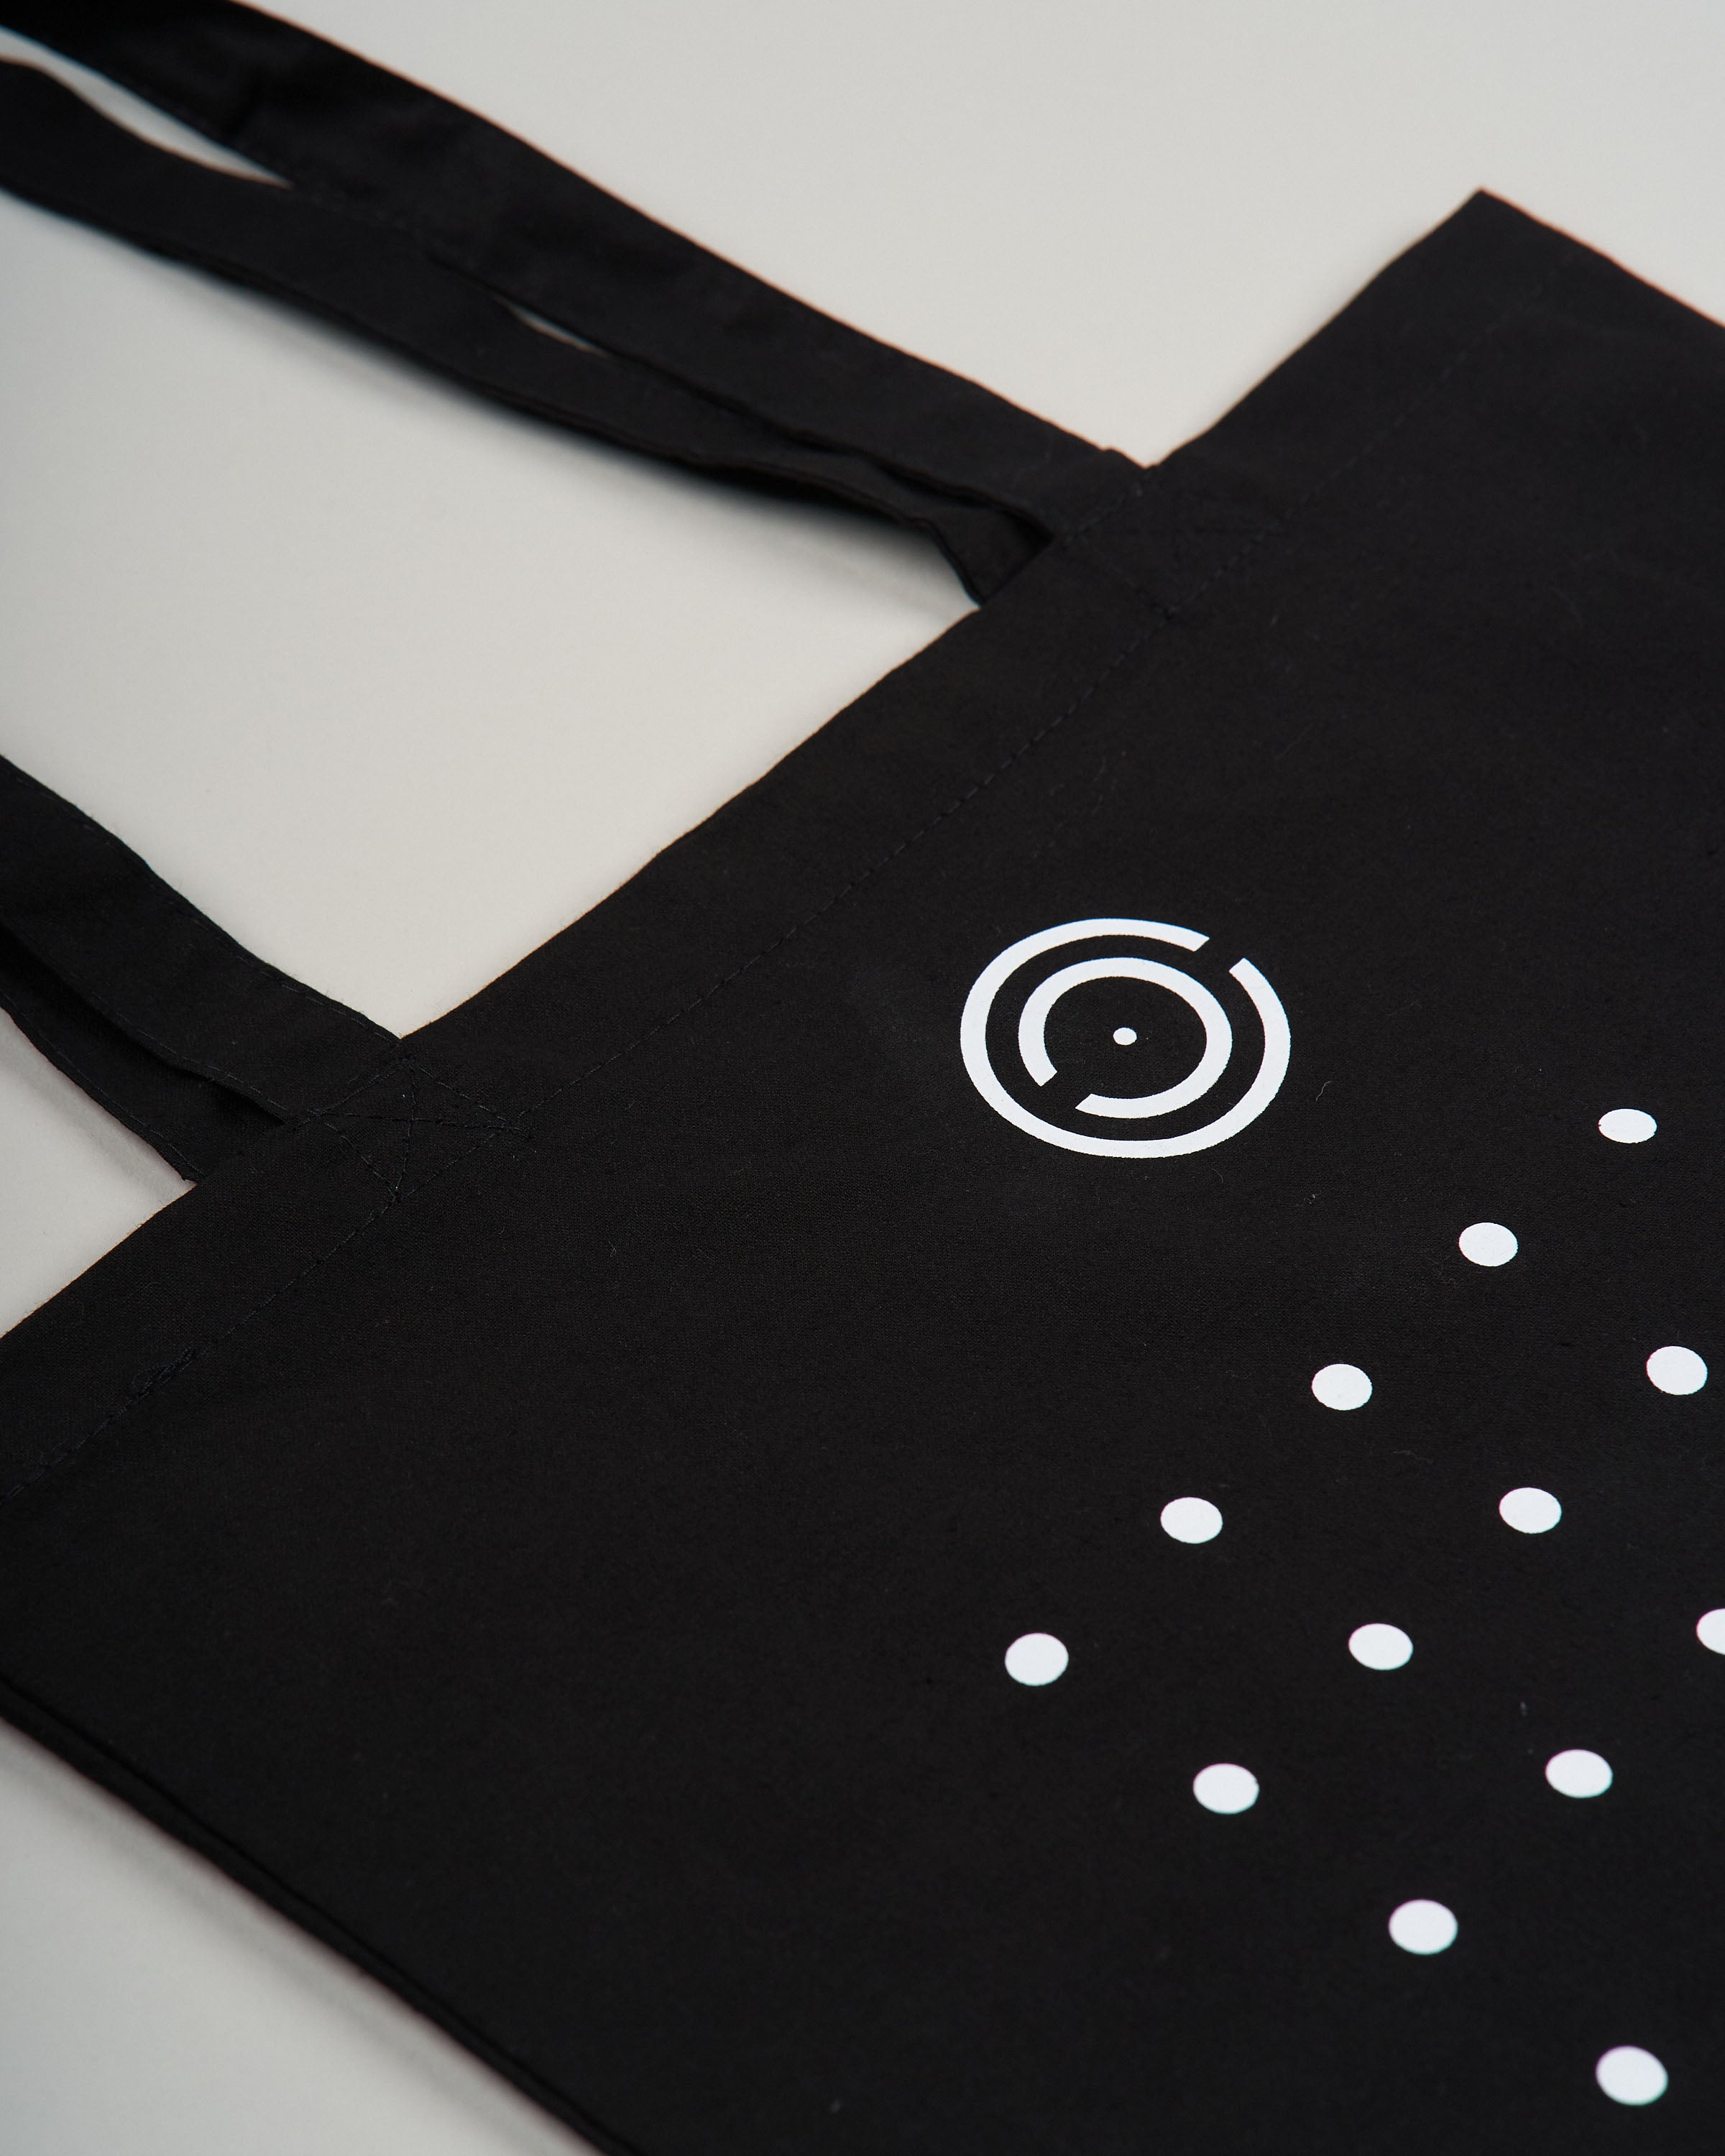 Connect Tote Bag